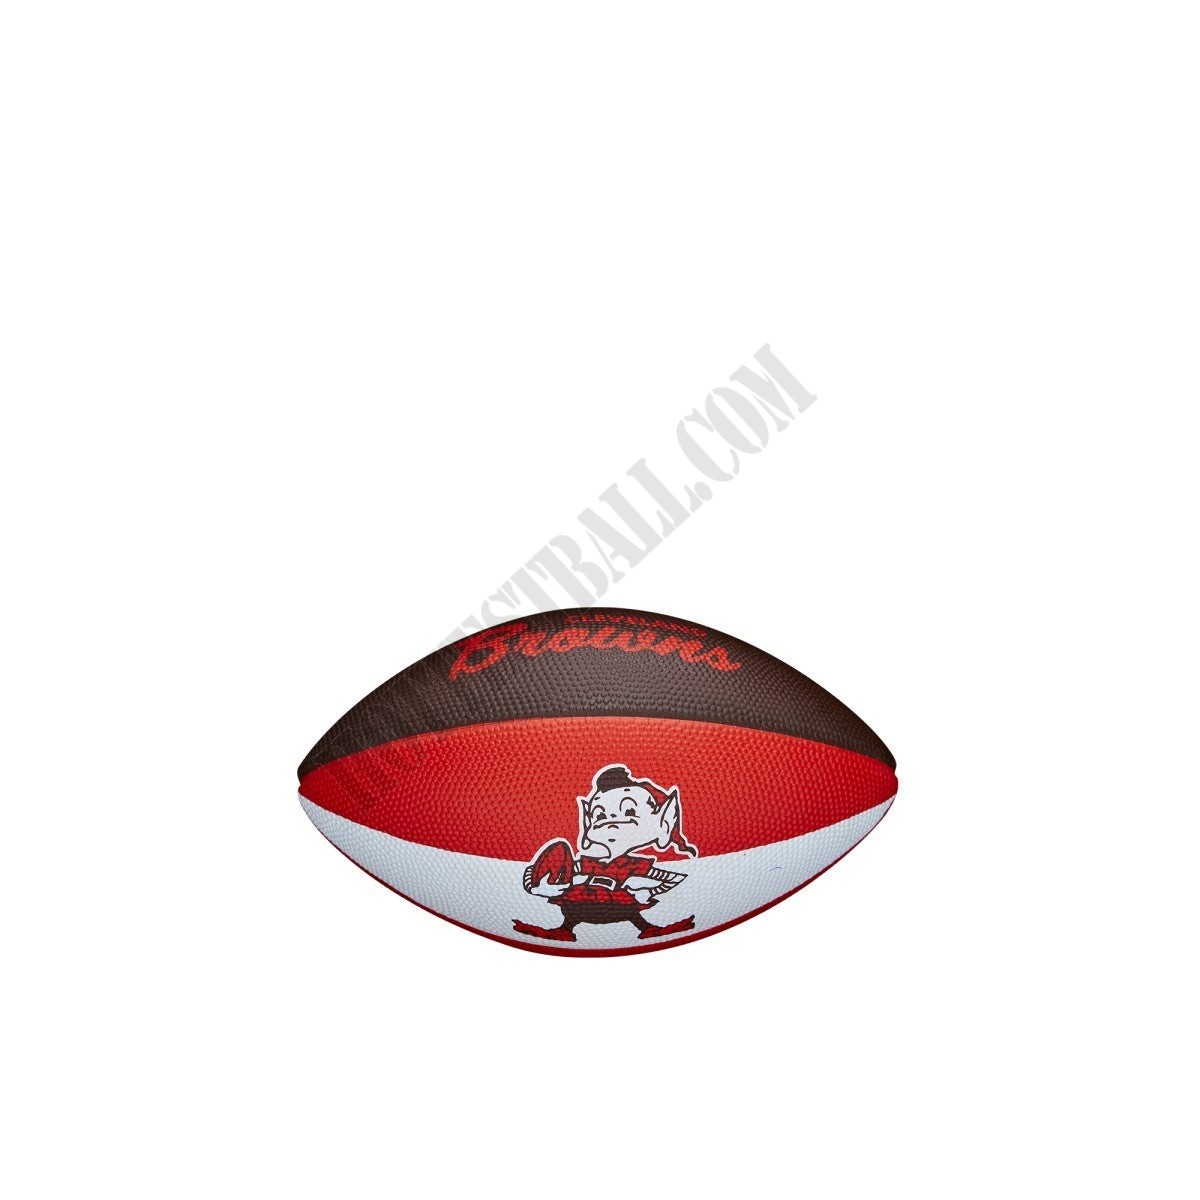 NFL Retro Mini Football - Cleveland Browns ● Wilson Promotions - -5